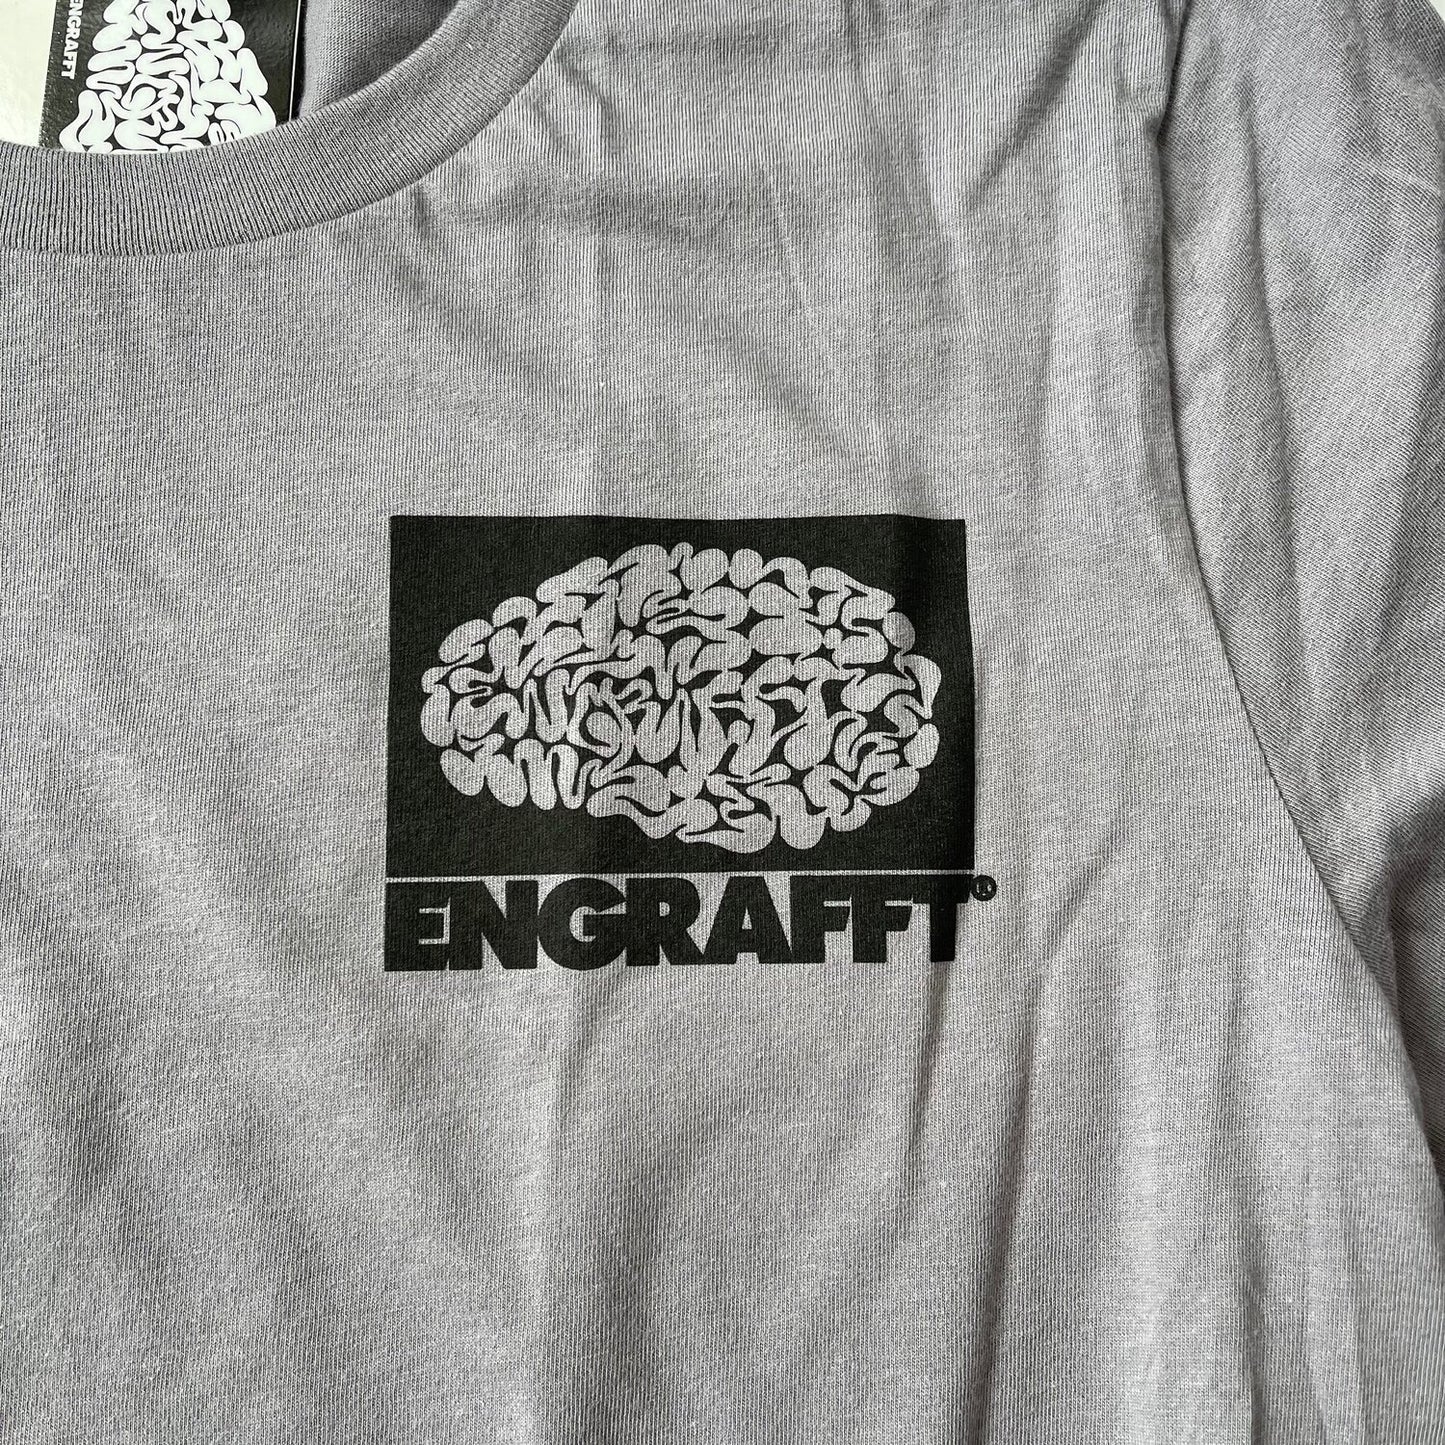 ENGRAFFT - The Thinking Men's Tee